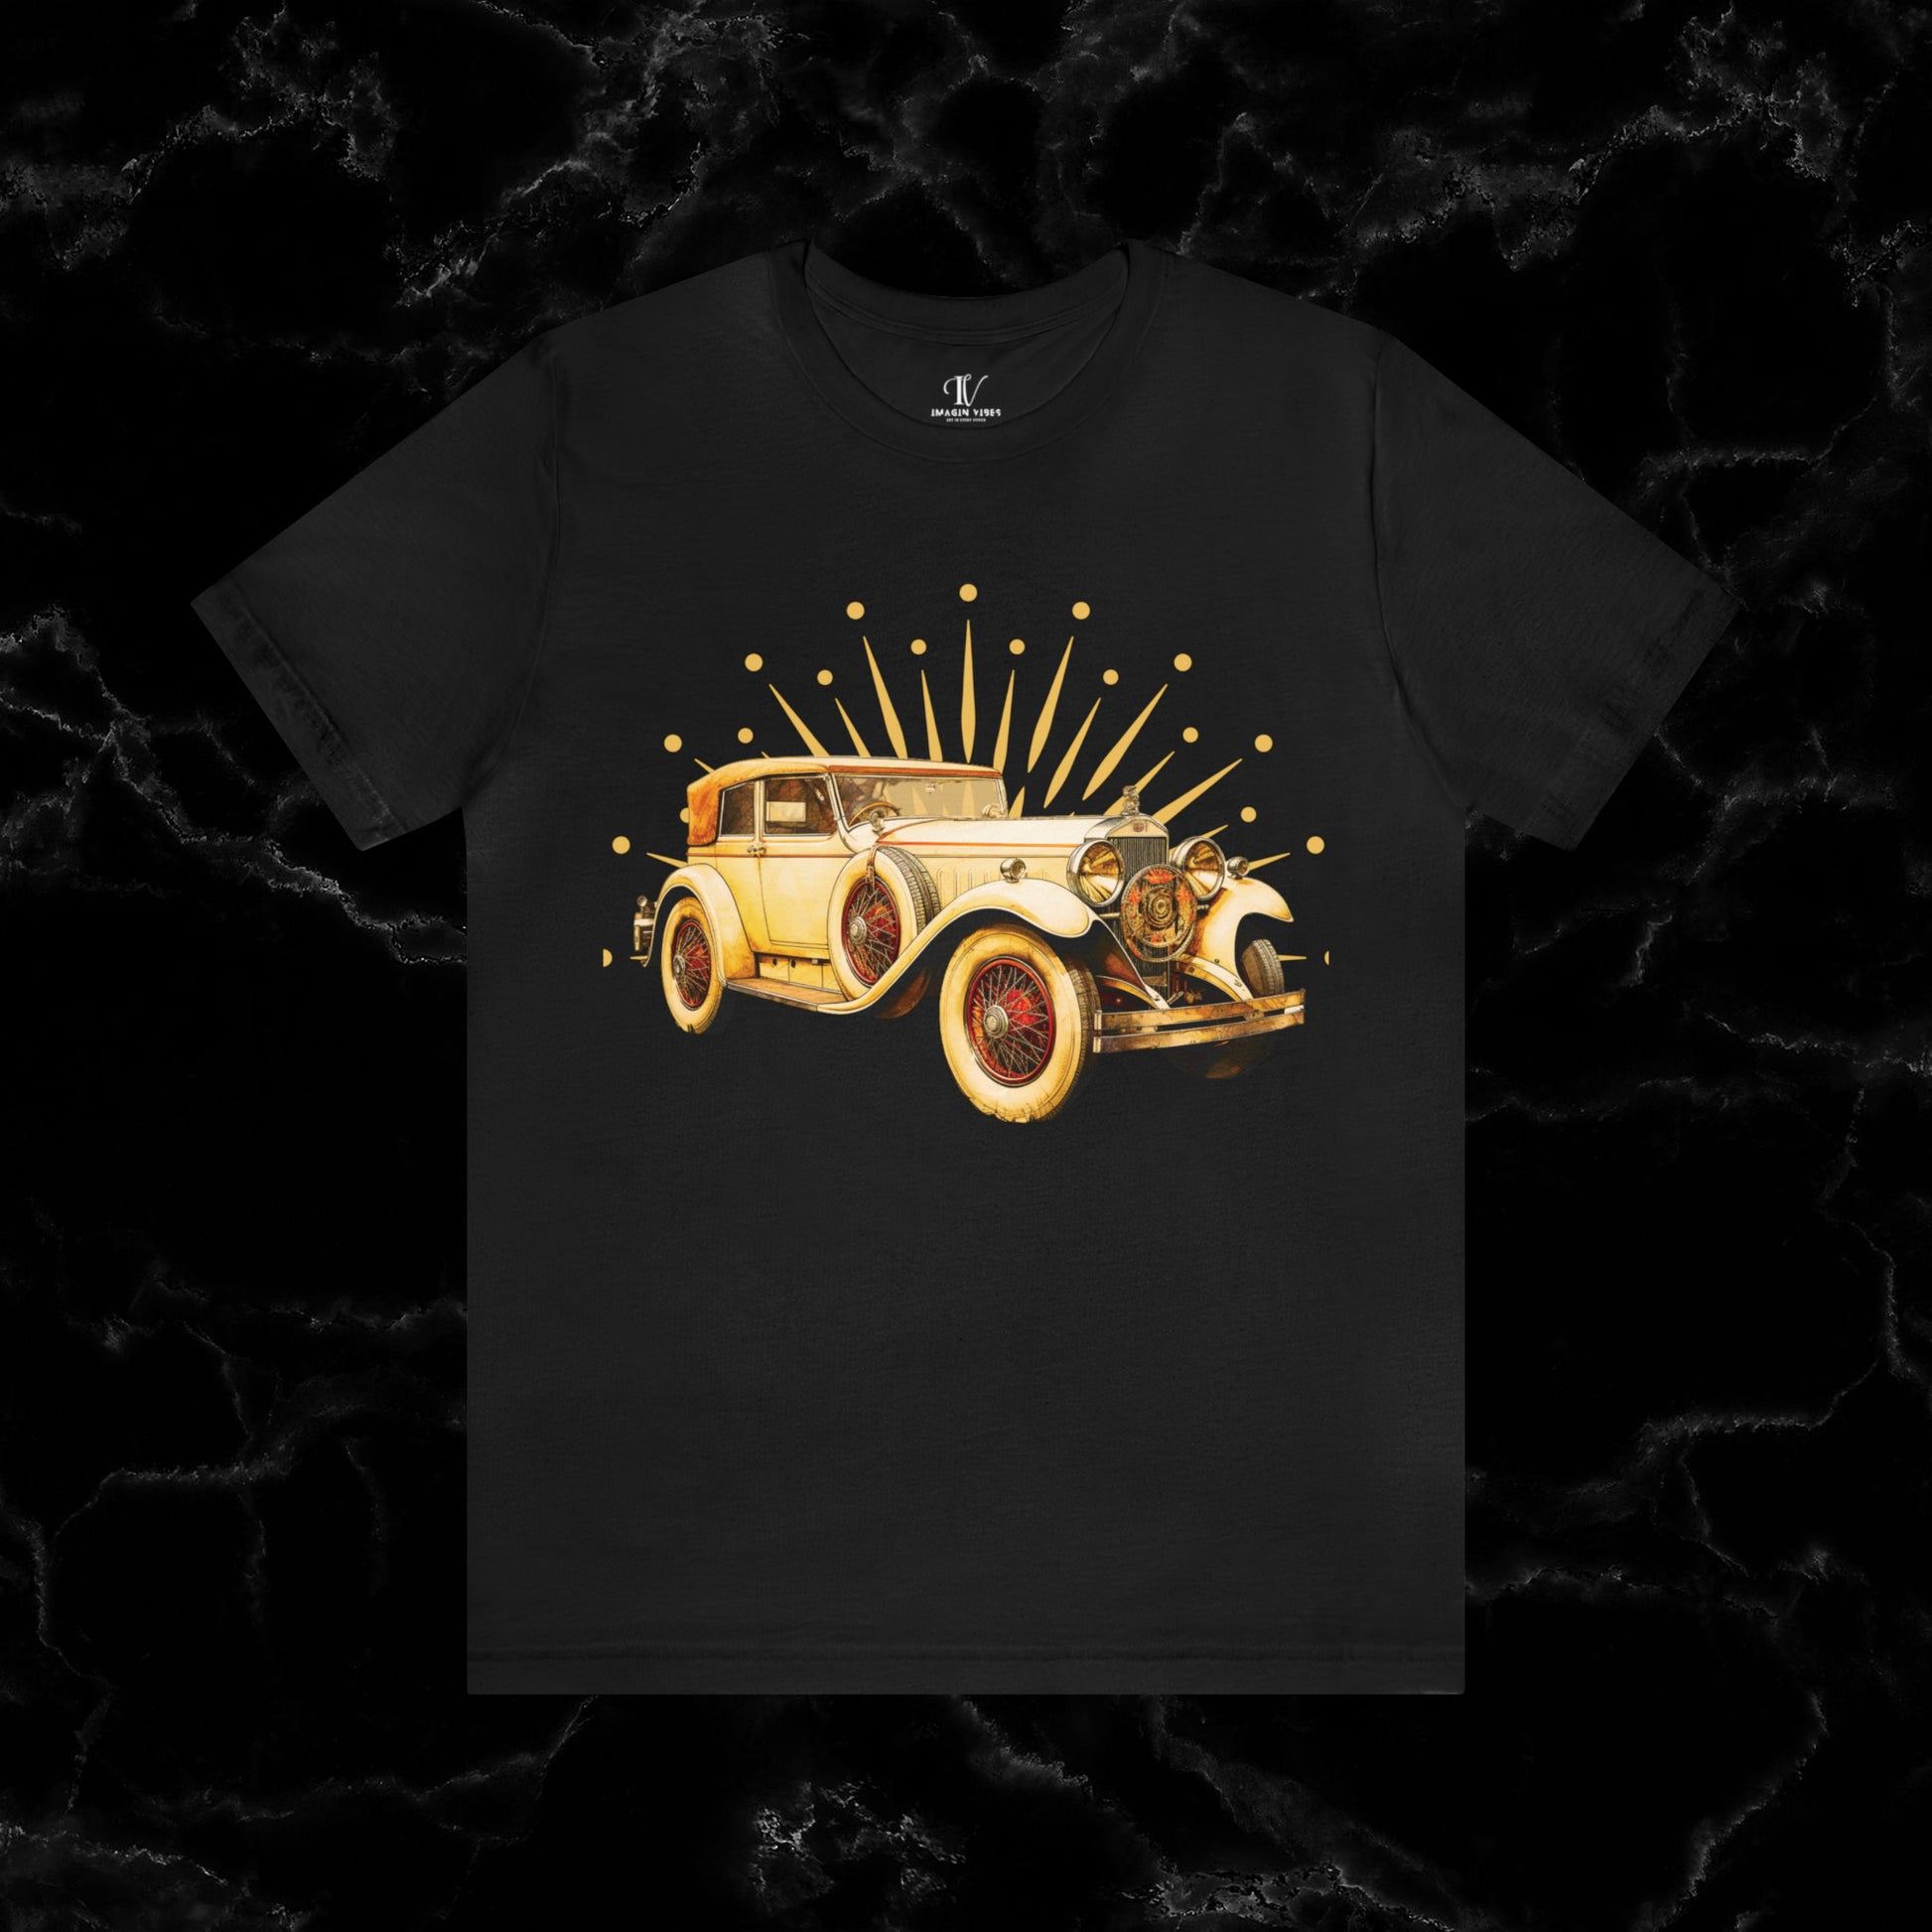 Vintage Car Enthusiast T-Shirt with Classic Wheels and Timeless Appeal T-Shirt Black S 